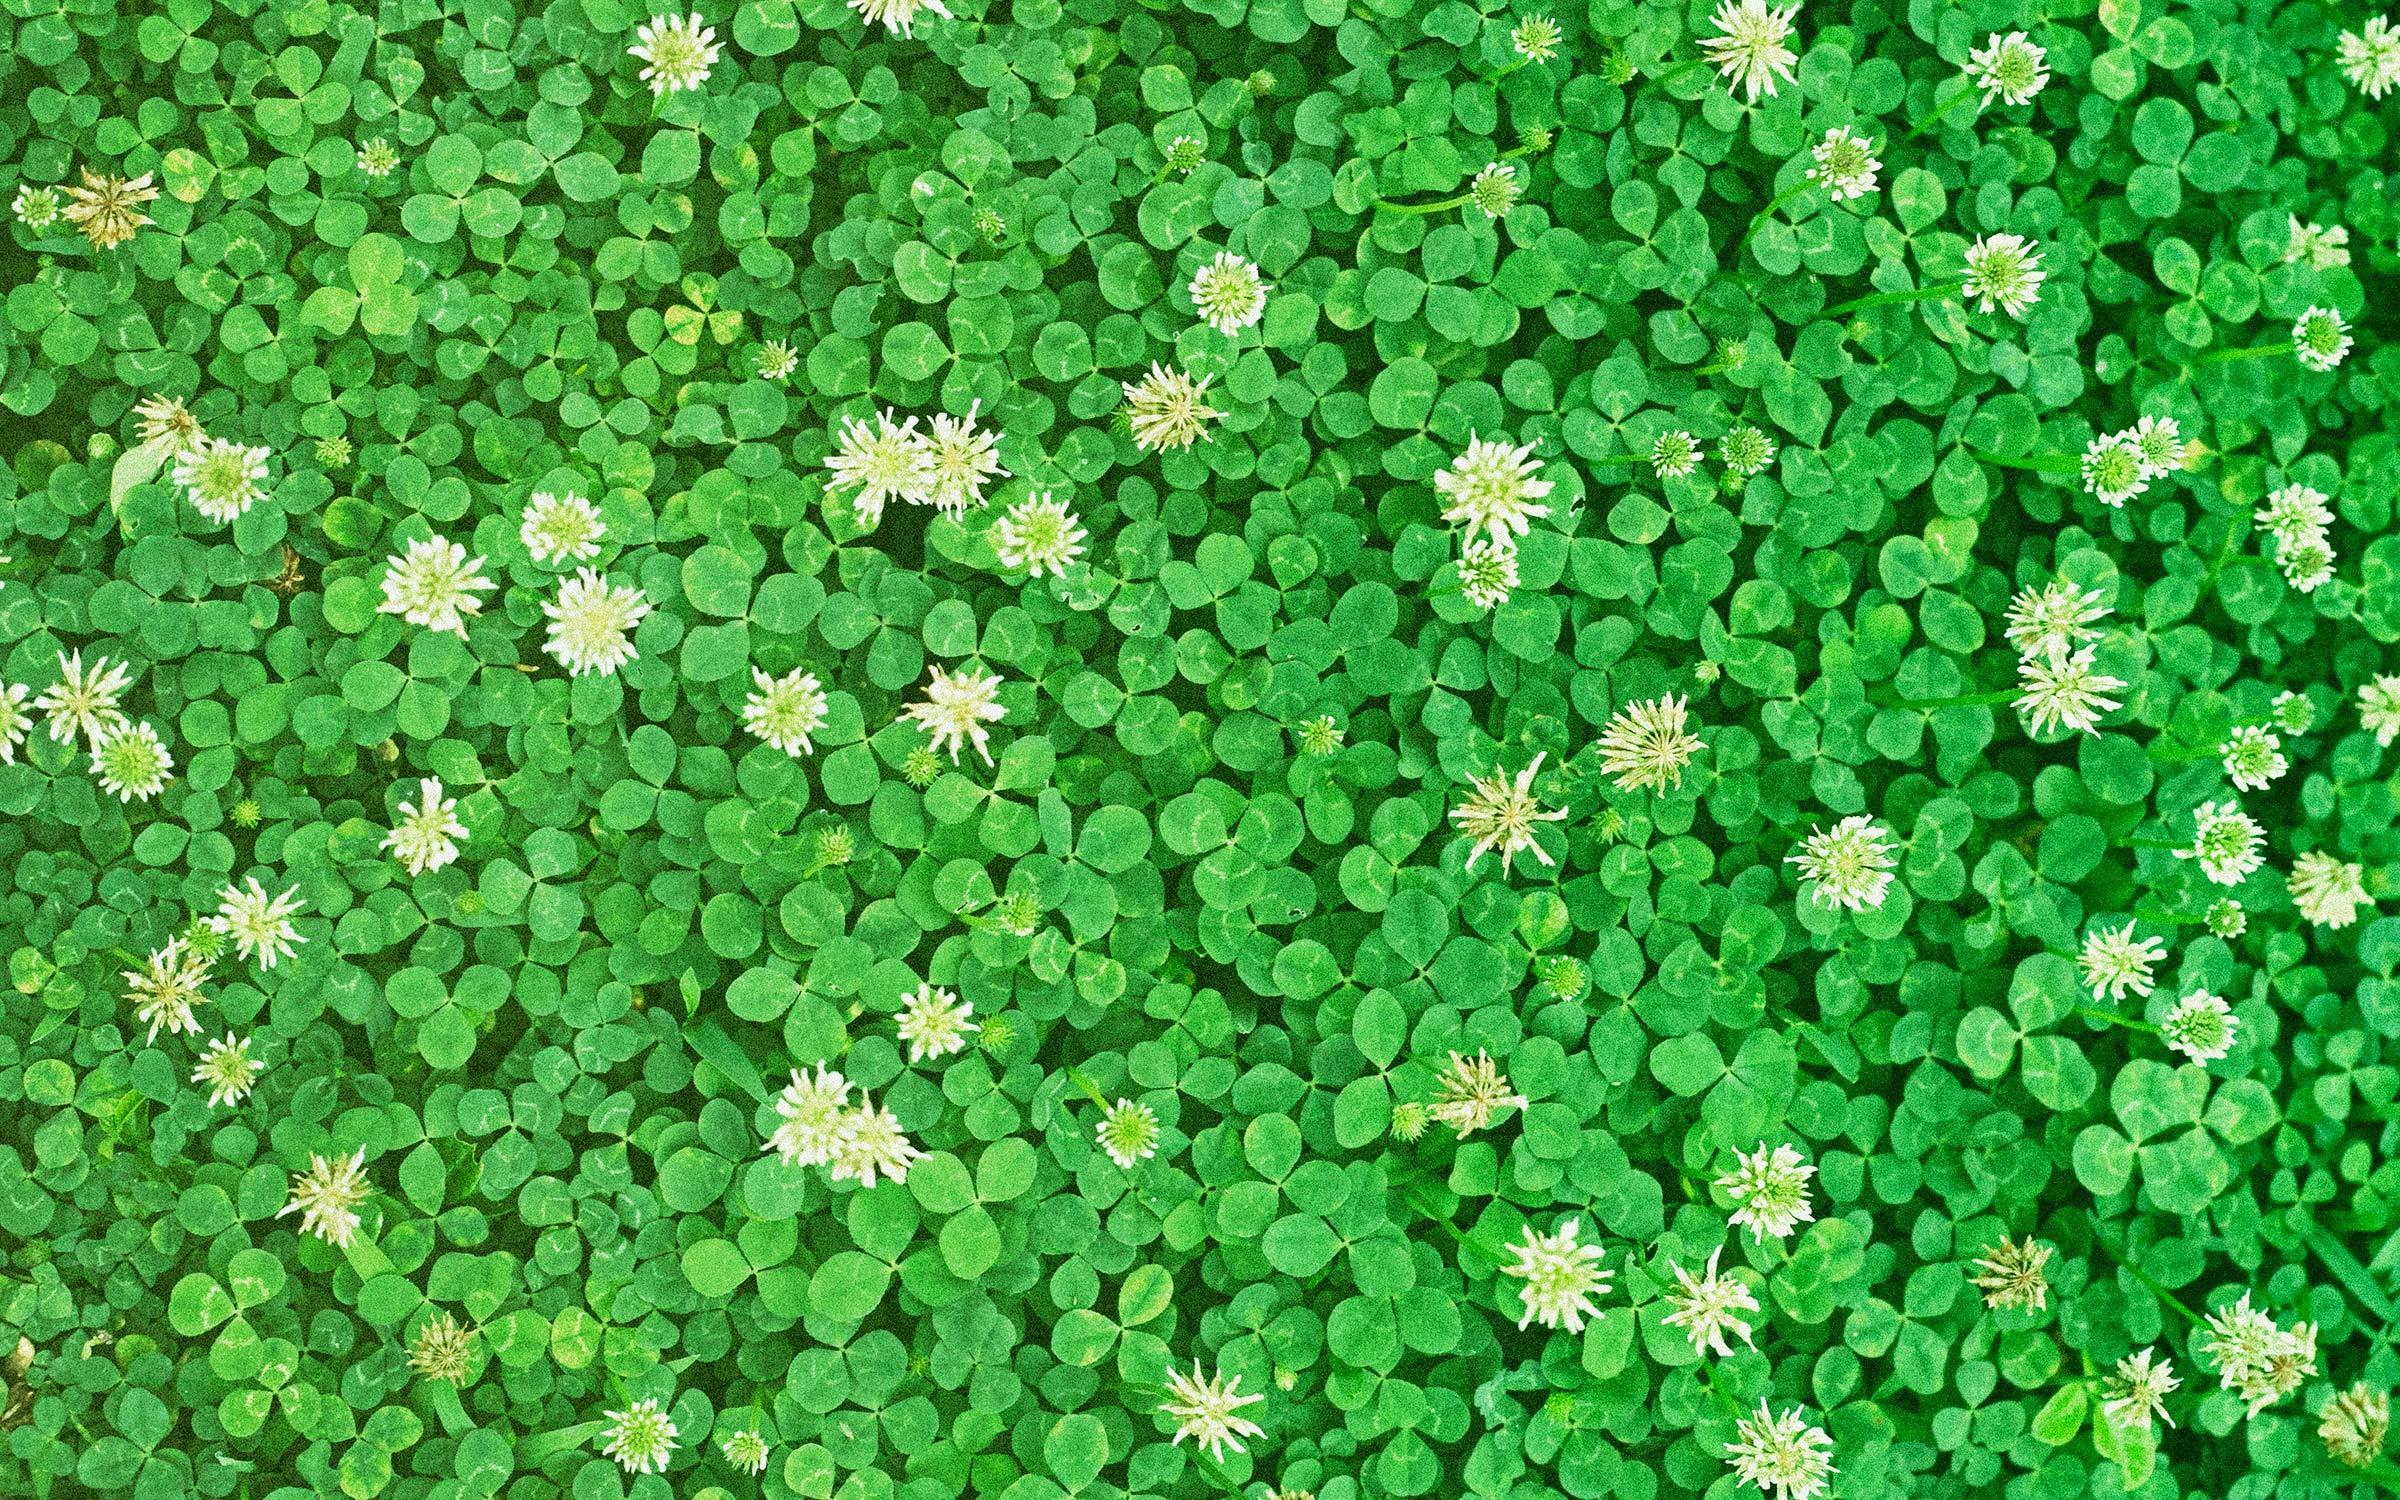 Would a Clover Lawn Work in Texas?